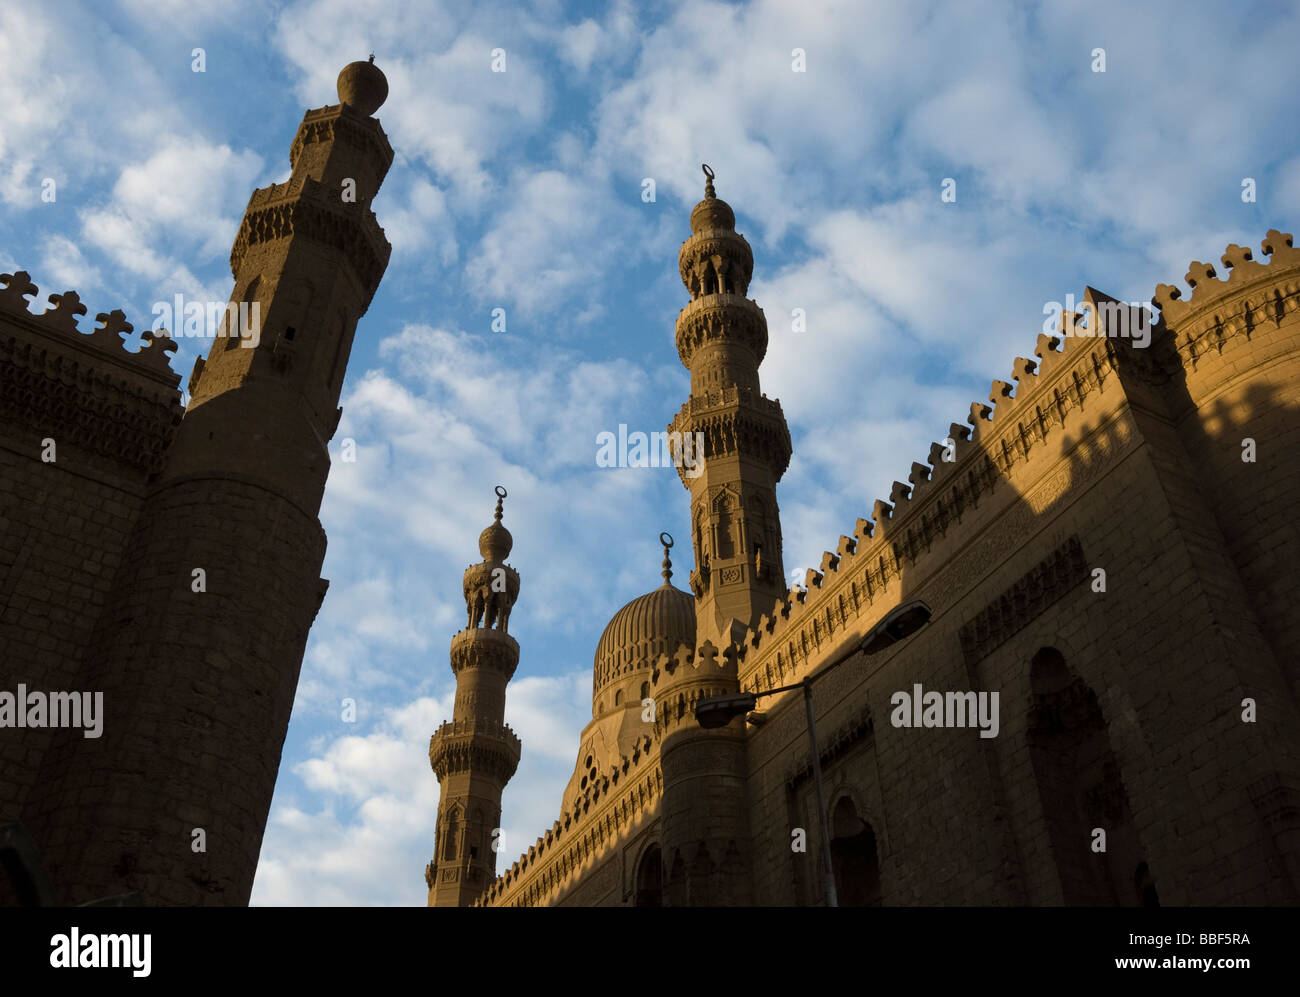 Minarets and domes of Sultan Hassan Mosque and Al Rifai Mosque, Cairo, Egypt Stock Photo